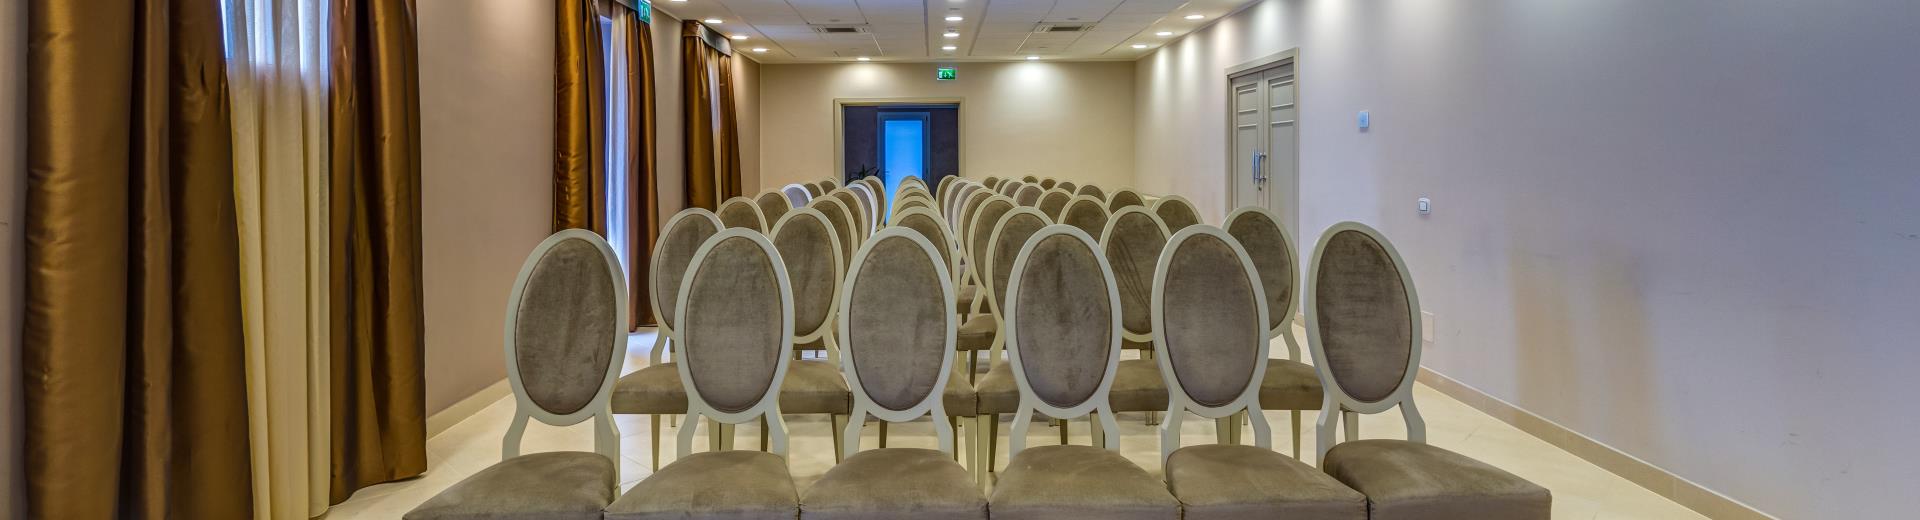 4 star Plus Hotel Perla del Porto provides conference rooms for your meetings